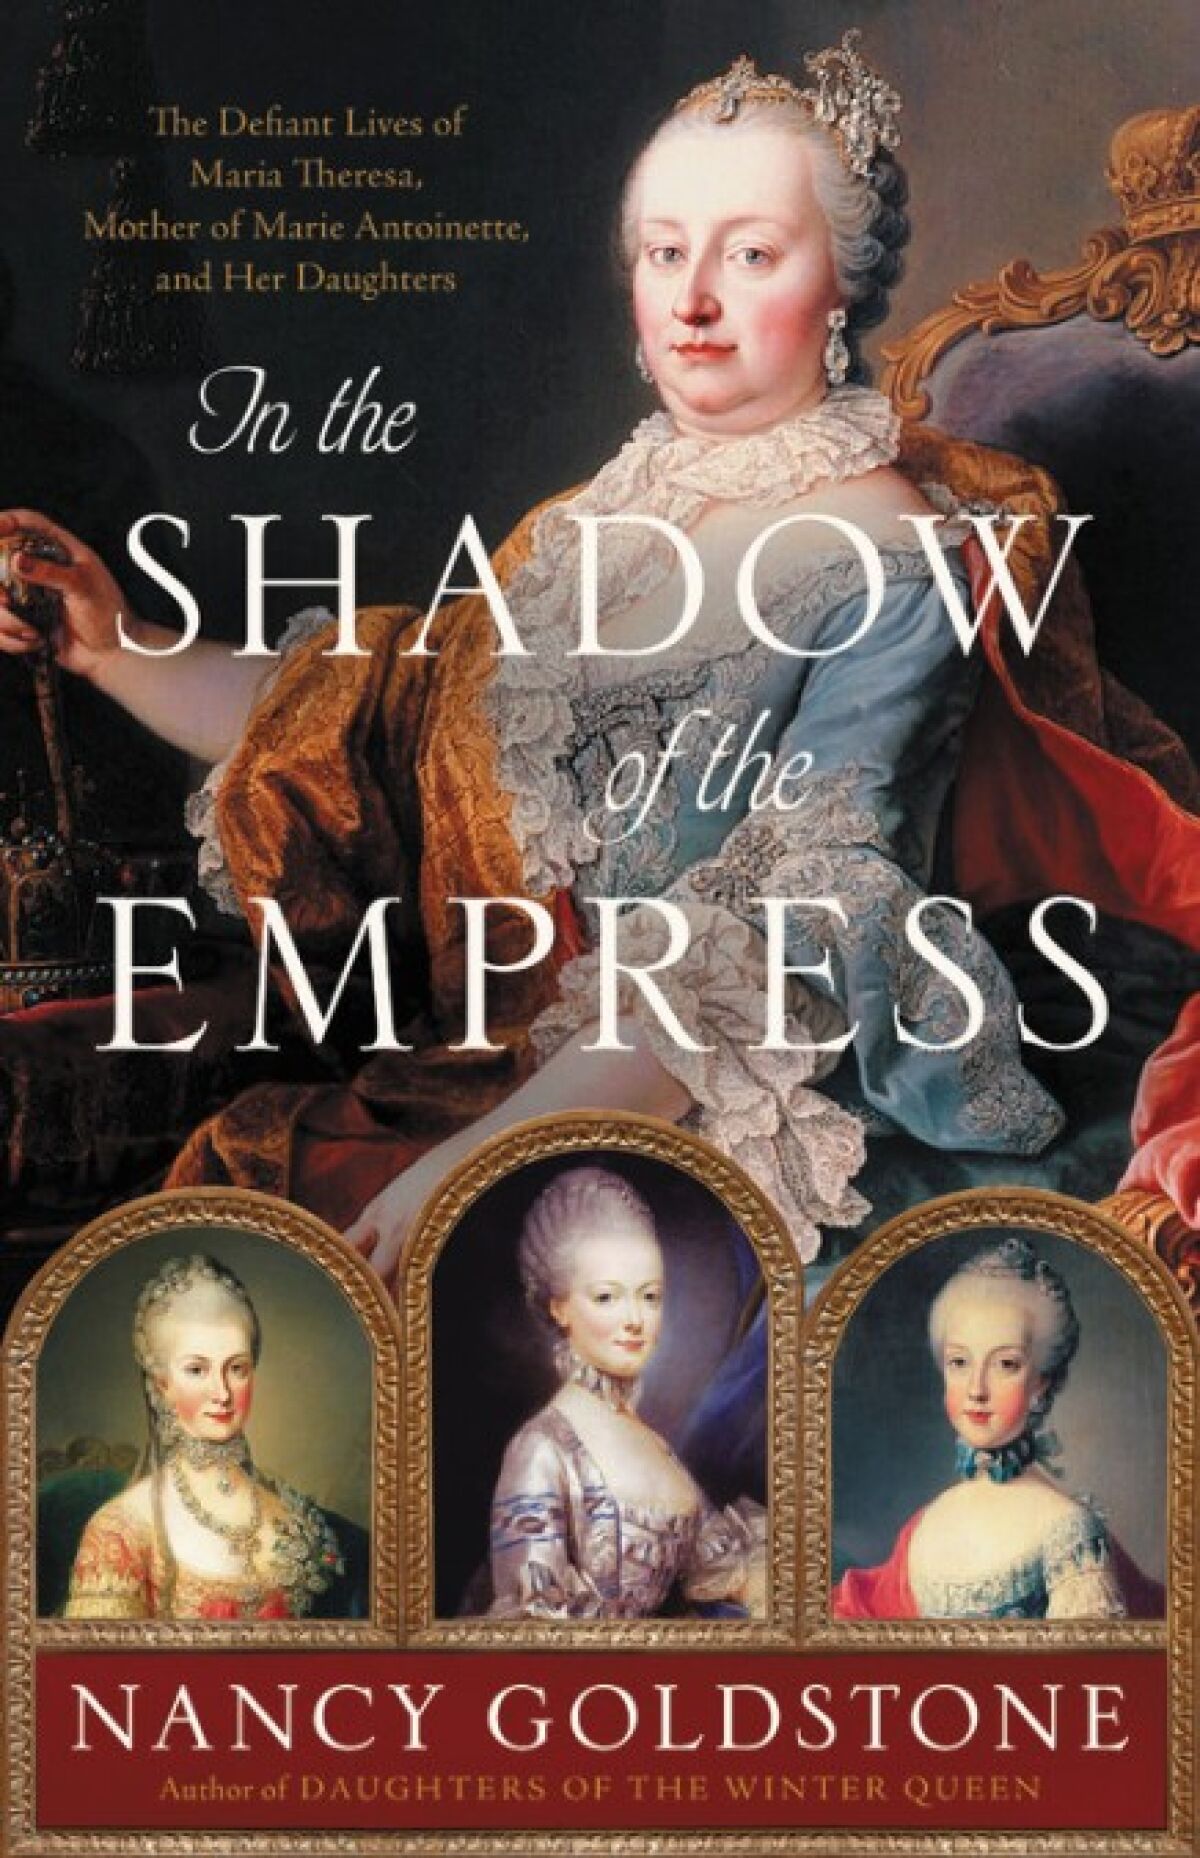 "In the Shadow of the Empress" by Nancy Goldstone